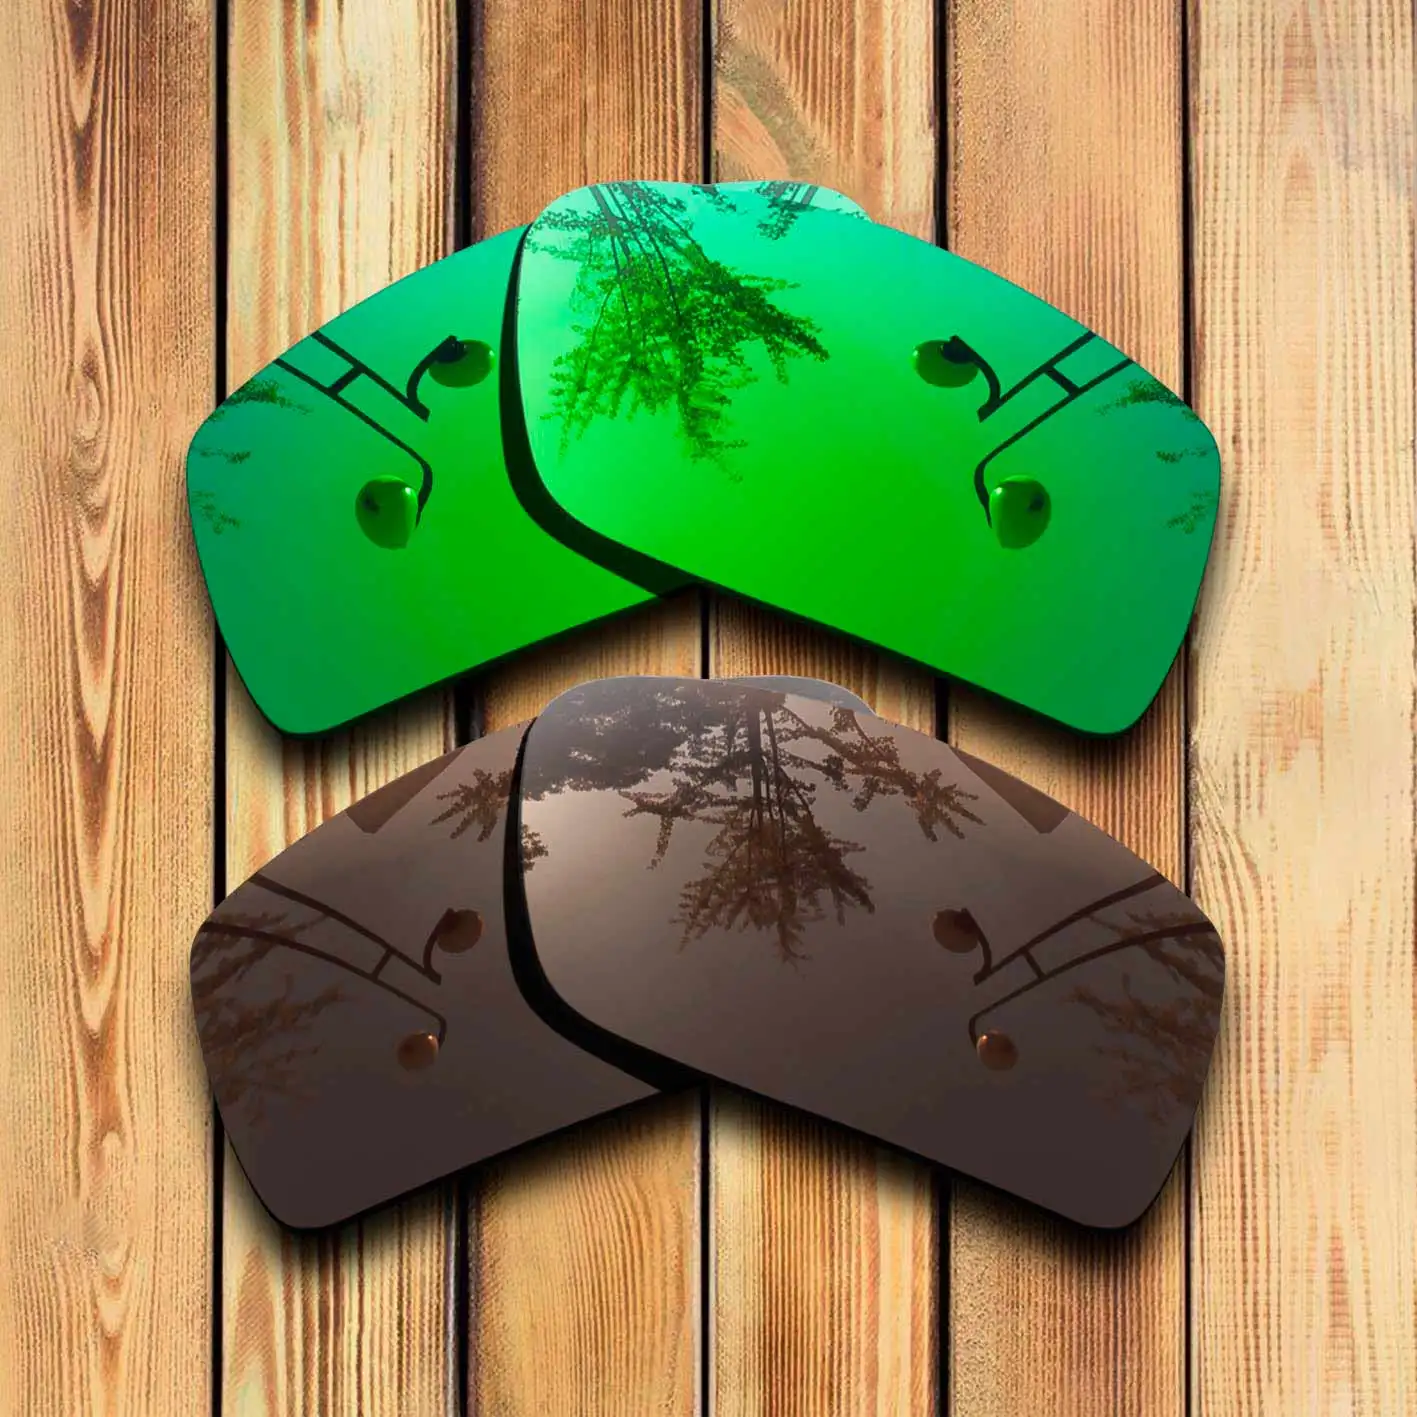 

100% Precisely Cut Polarized Replacement Lenses For-Spy Optic General Sunglasses Green & Brown Combine Options